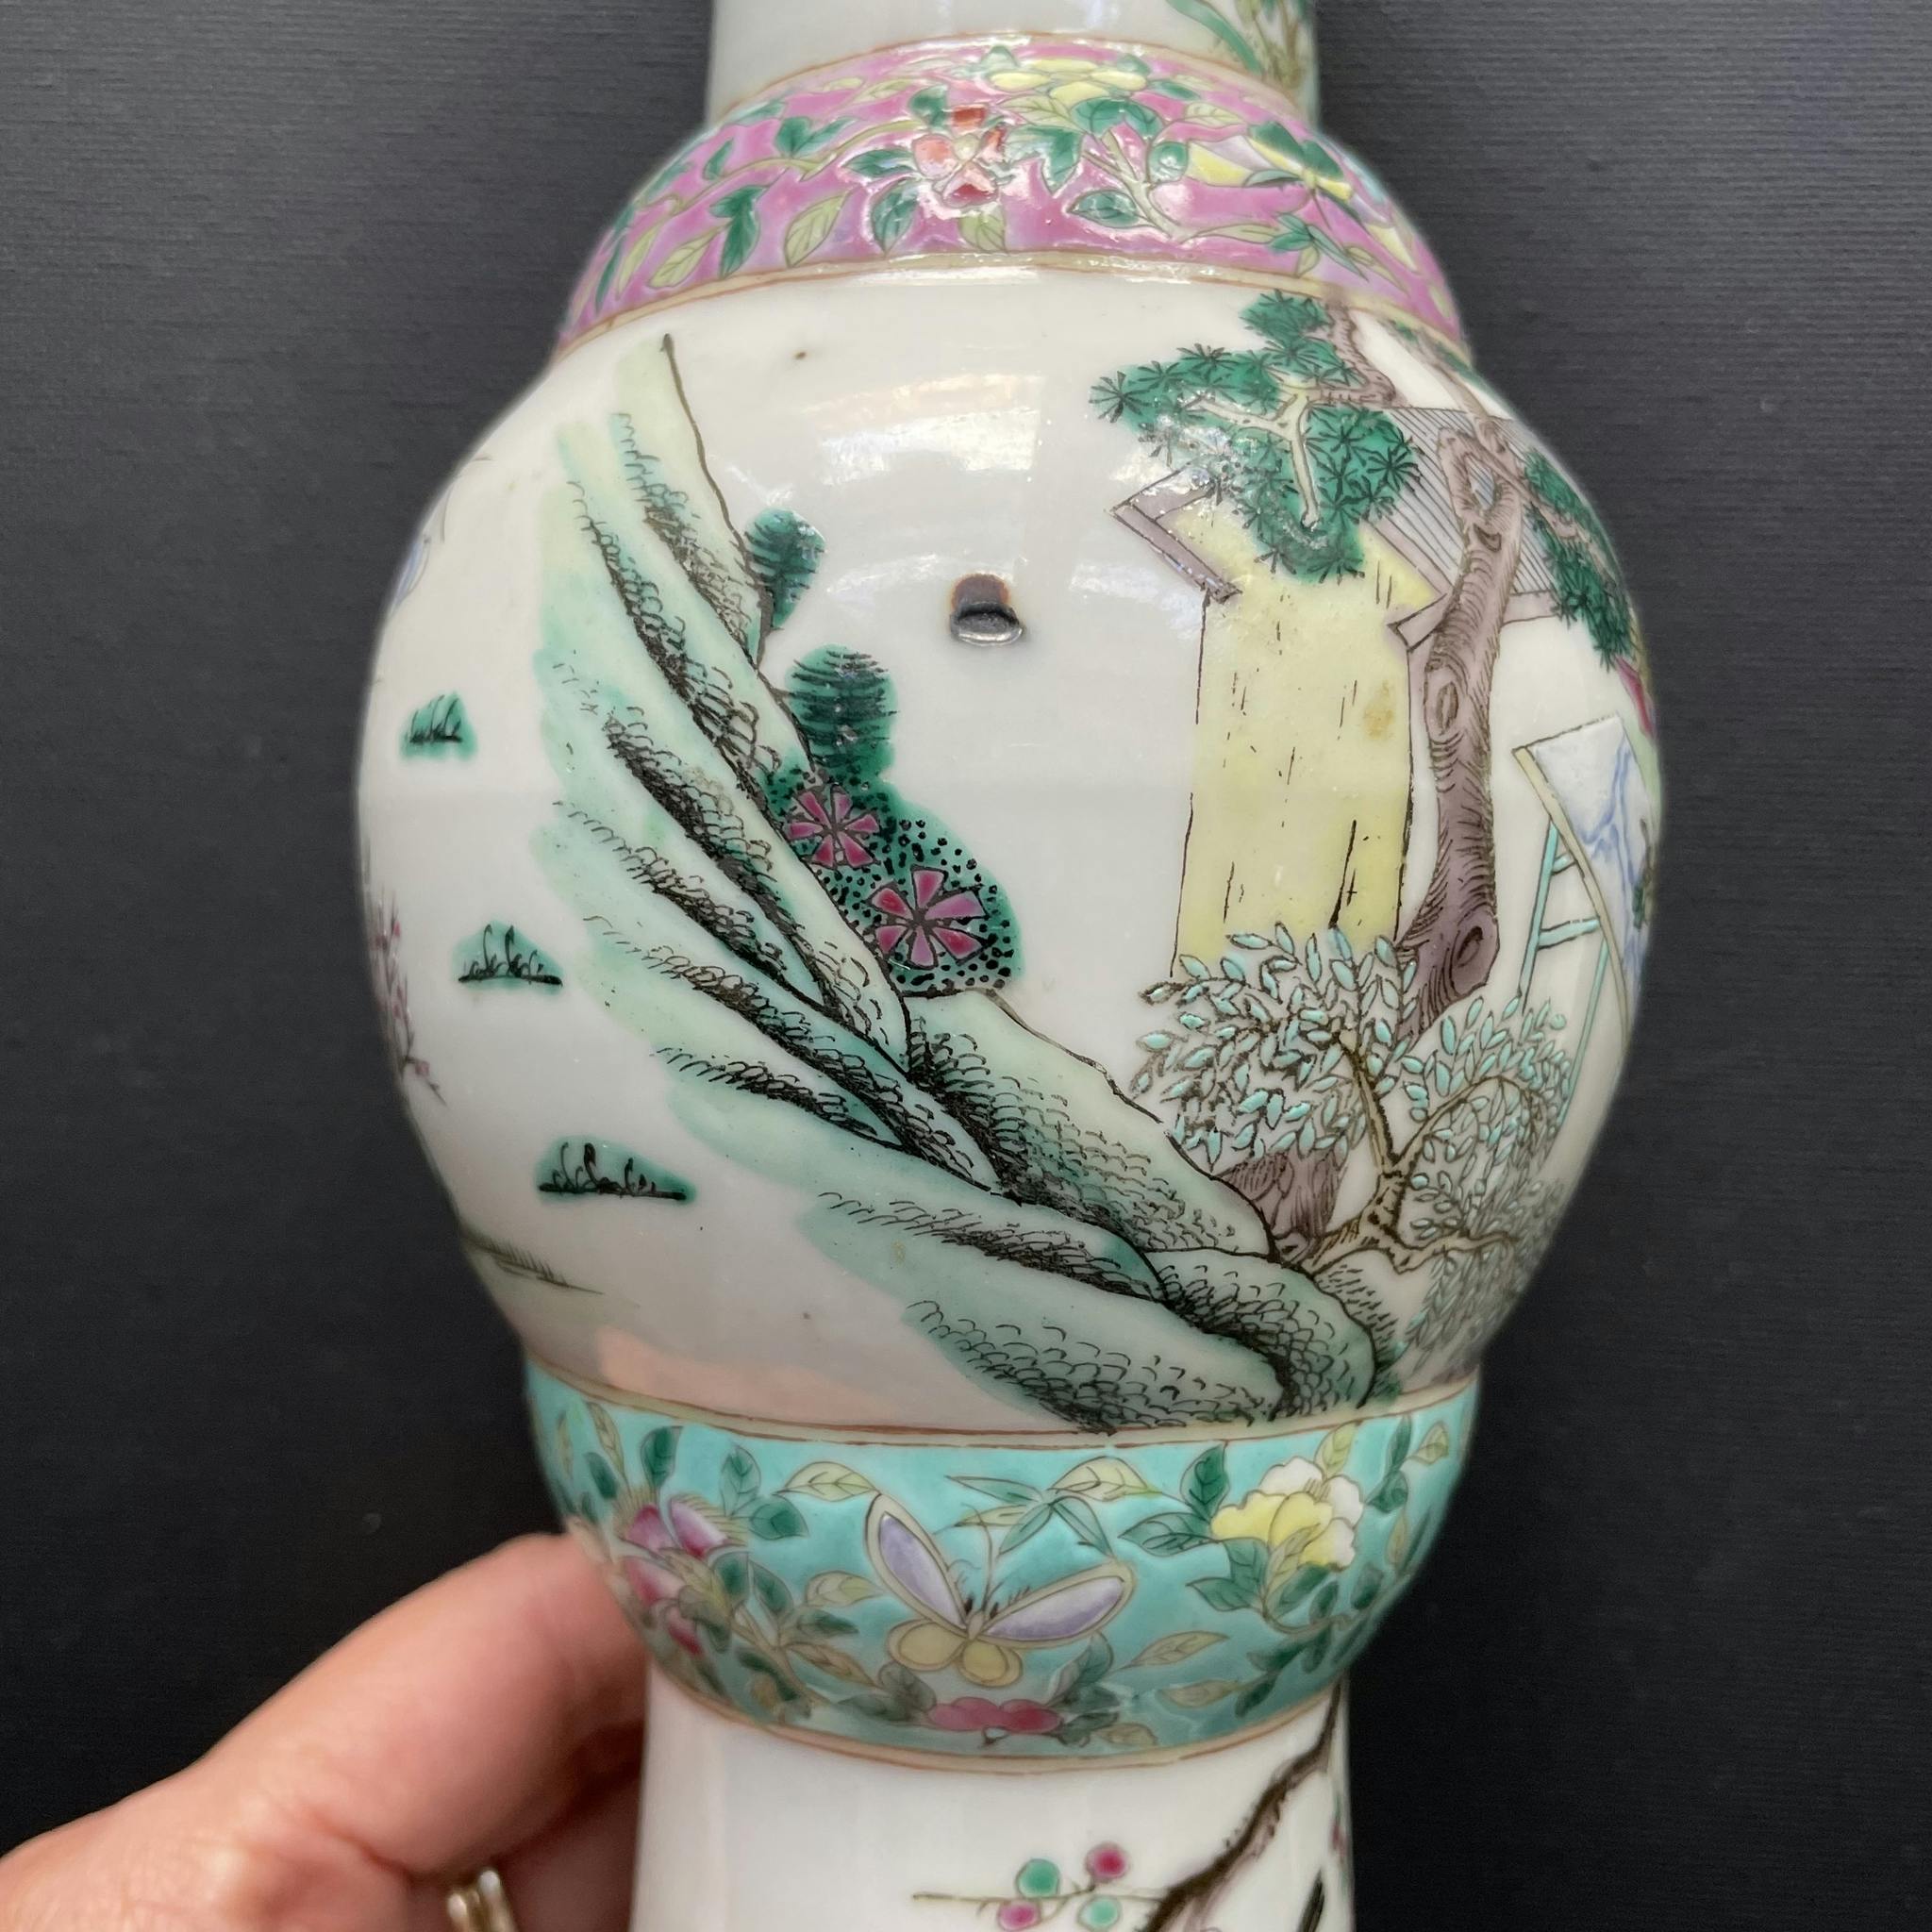 Antique Chinese Porcelain Vase Late Qing, 19th century #1188